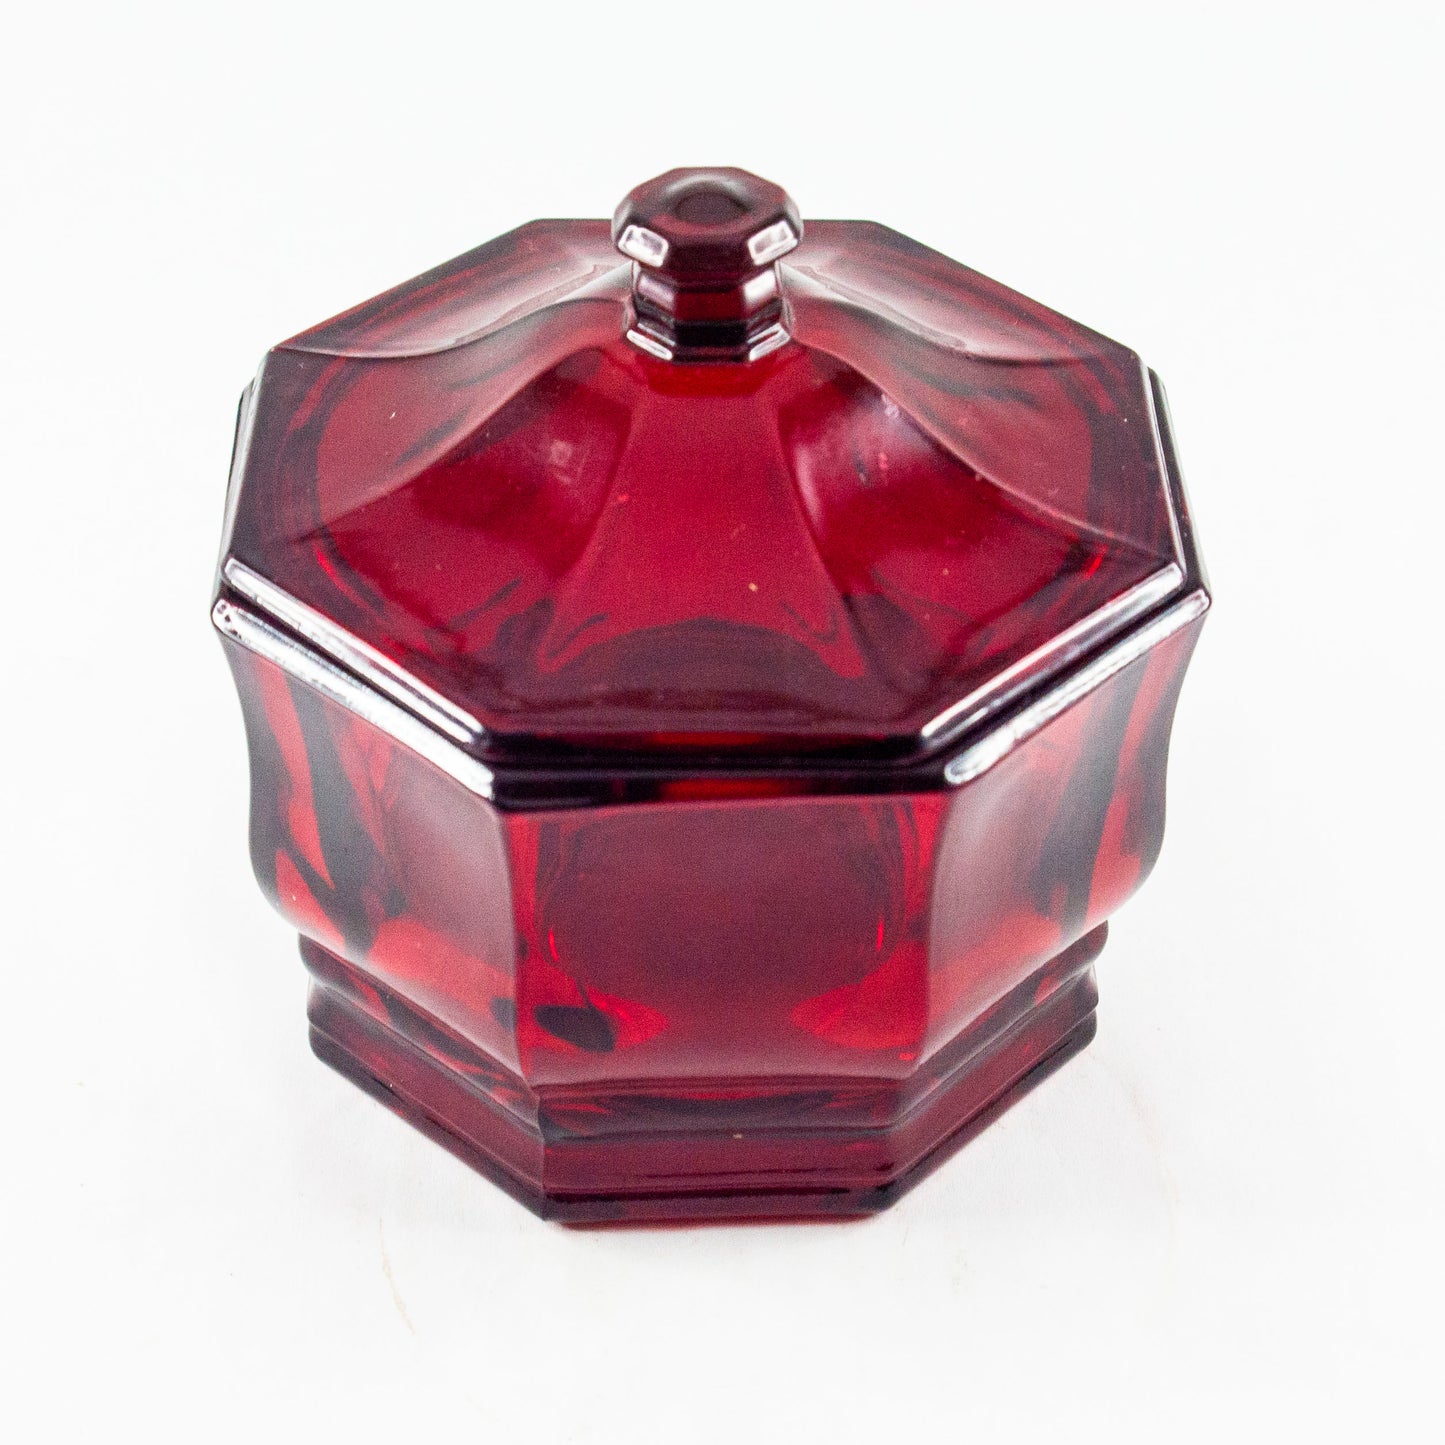 Octagonal Red Lidded Candy Dish